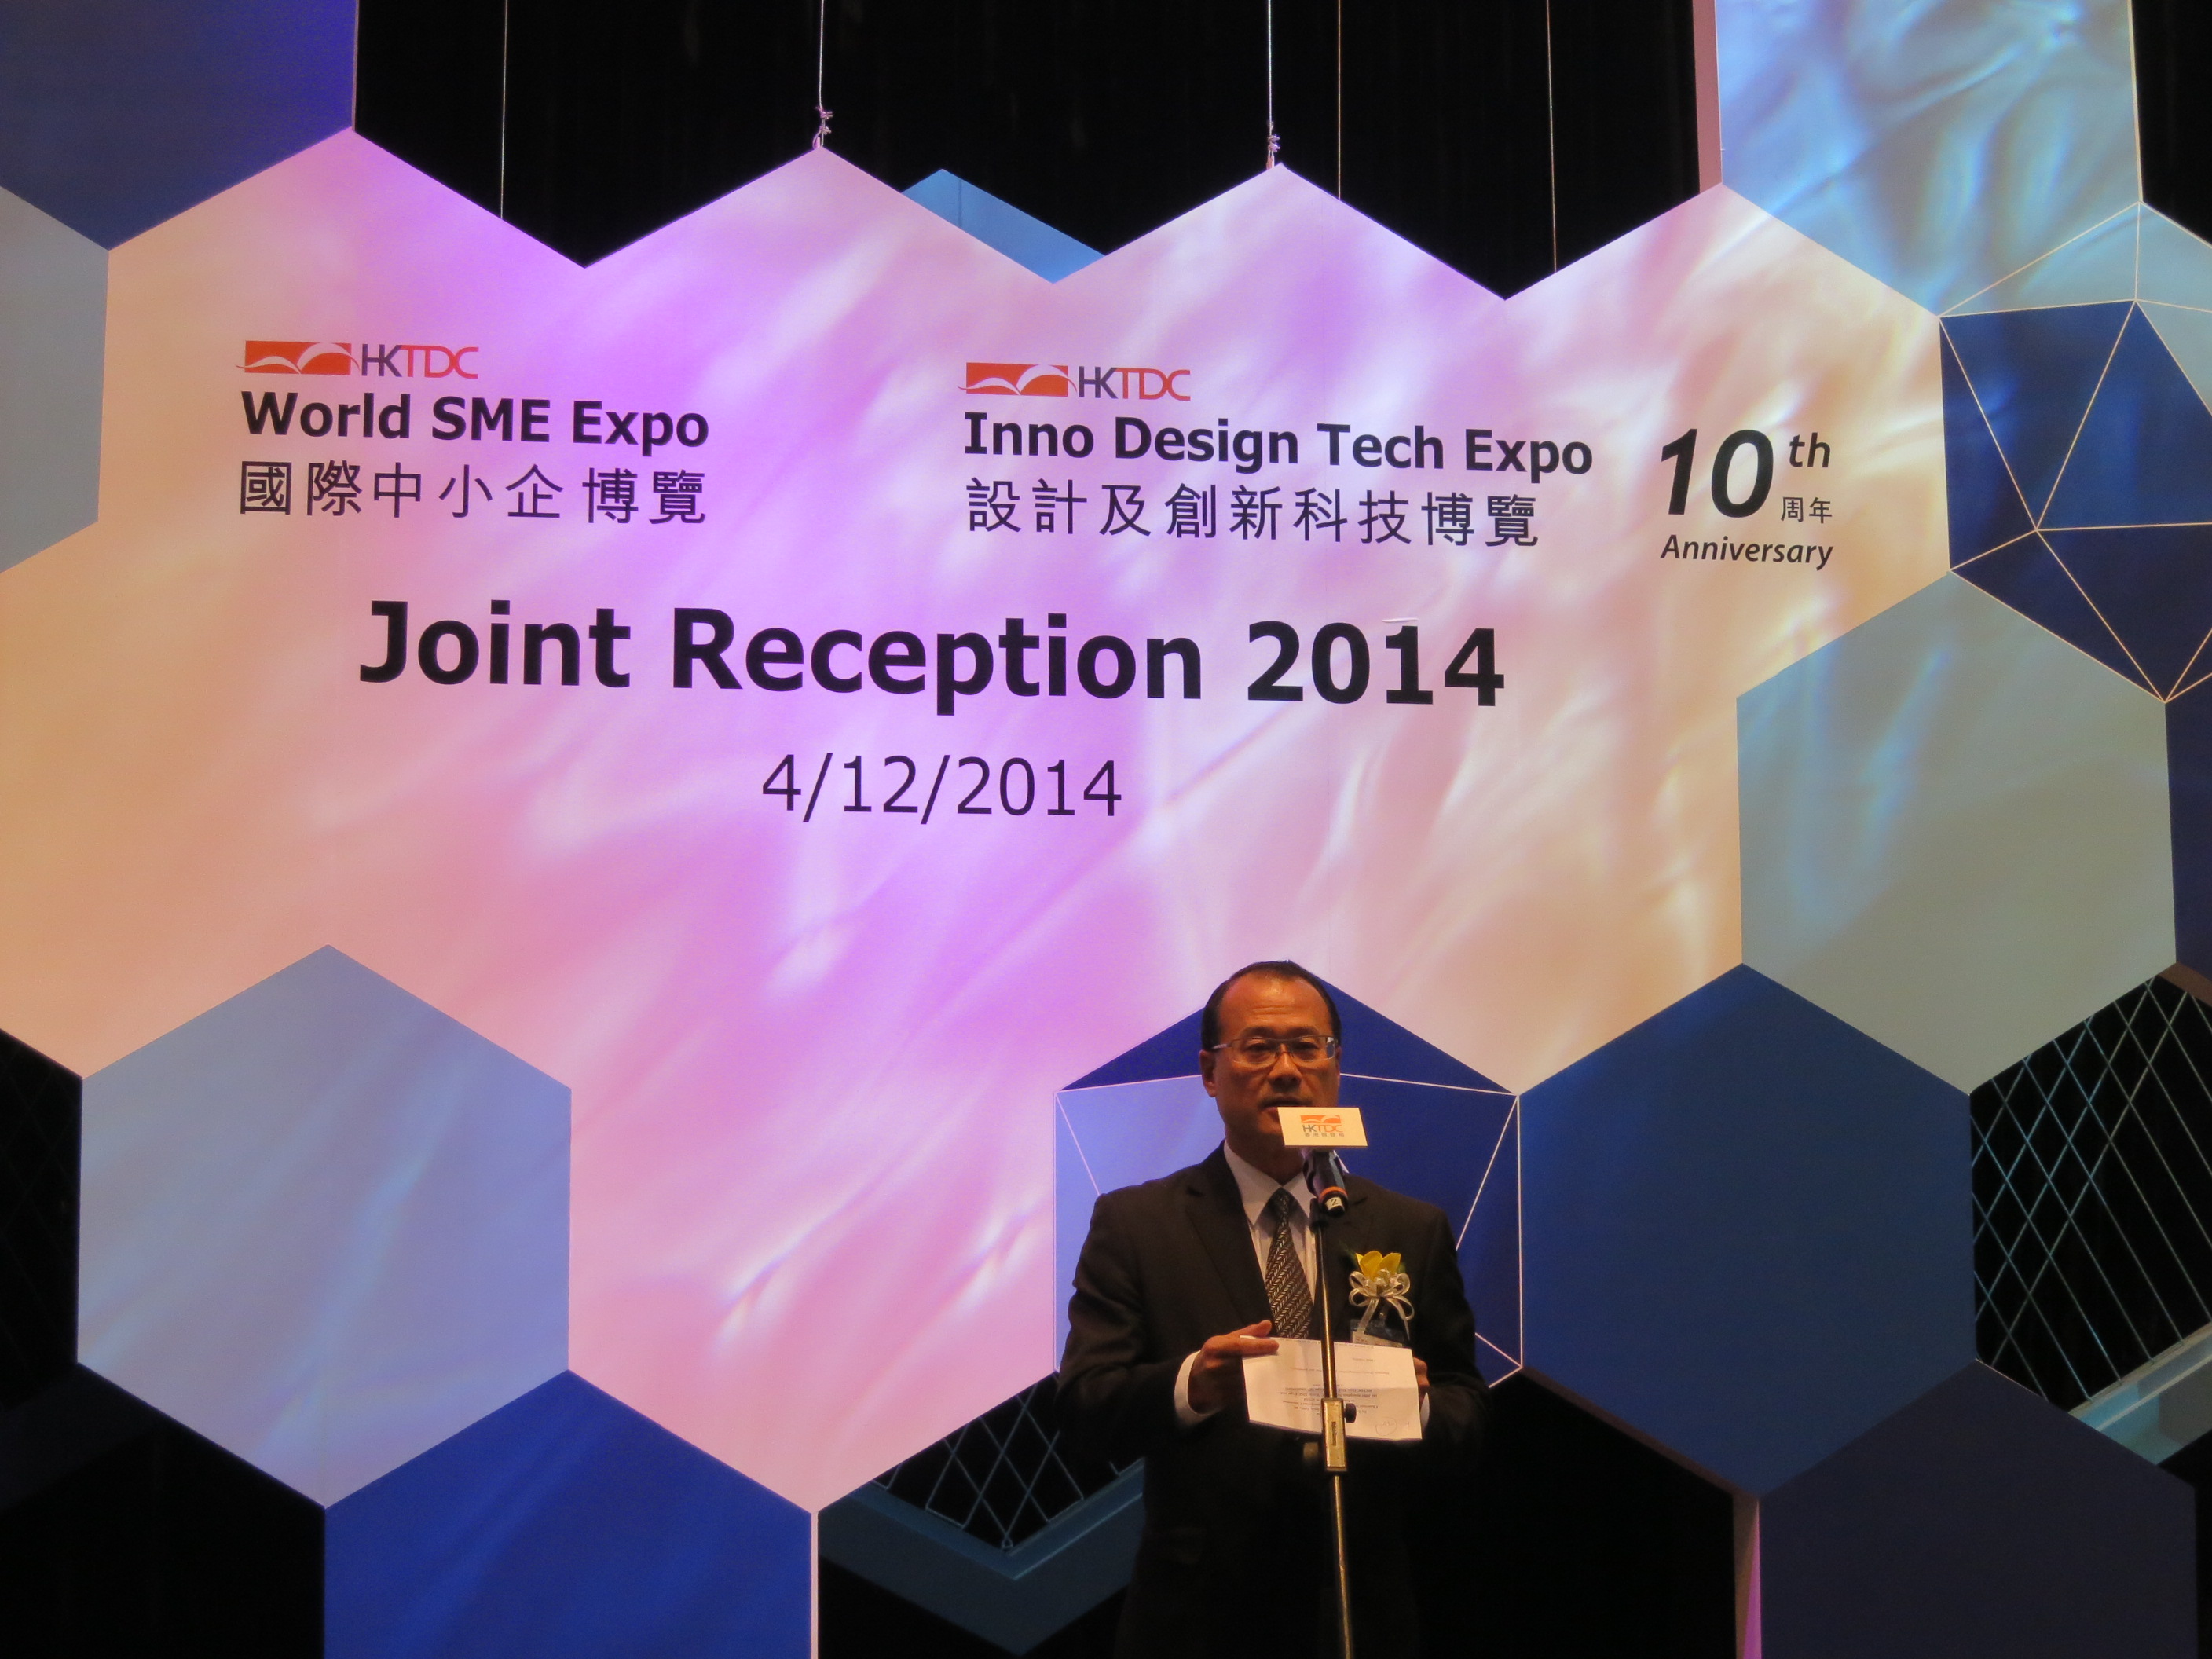 Photo 8 : Dr Jonathan Choi Koon-shum, GBS, JP, Chairman of the Small and Medium Enterprises Committee, attended the Joint Reception for World SME Expo and Inno Design Tech Expo 10th Anniversary held in Hong Kong Convention and Exhibition Centre on 4 December 2014 as Guest of Honour.